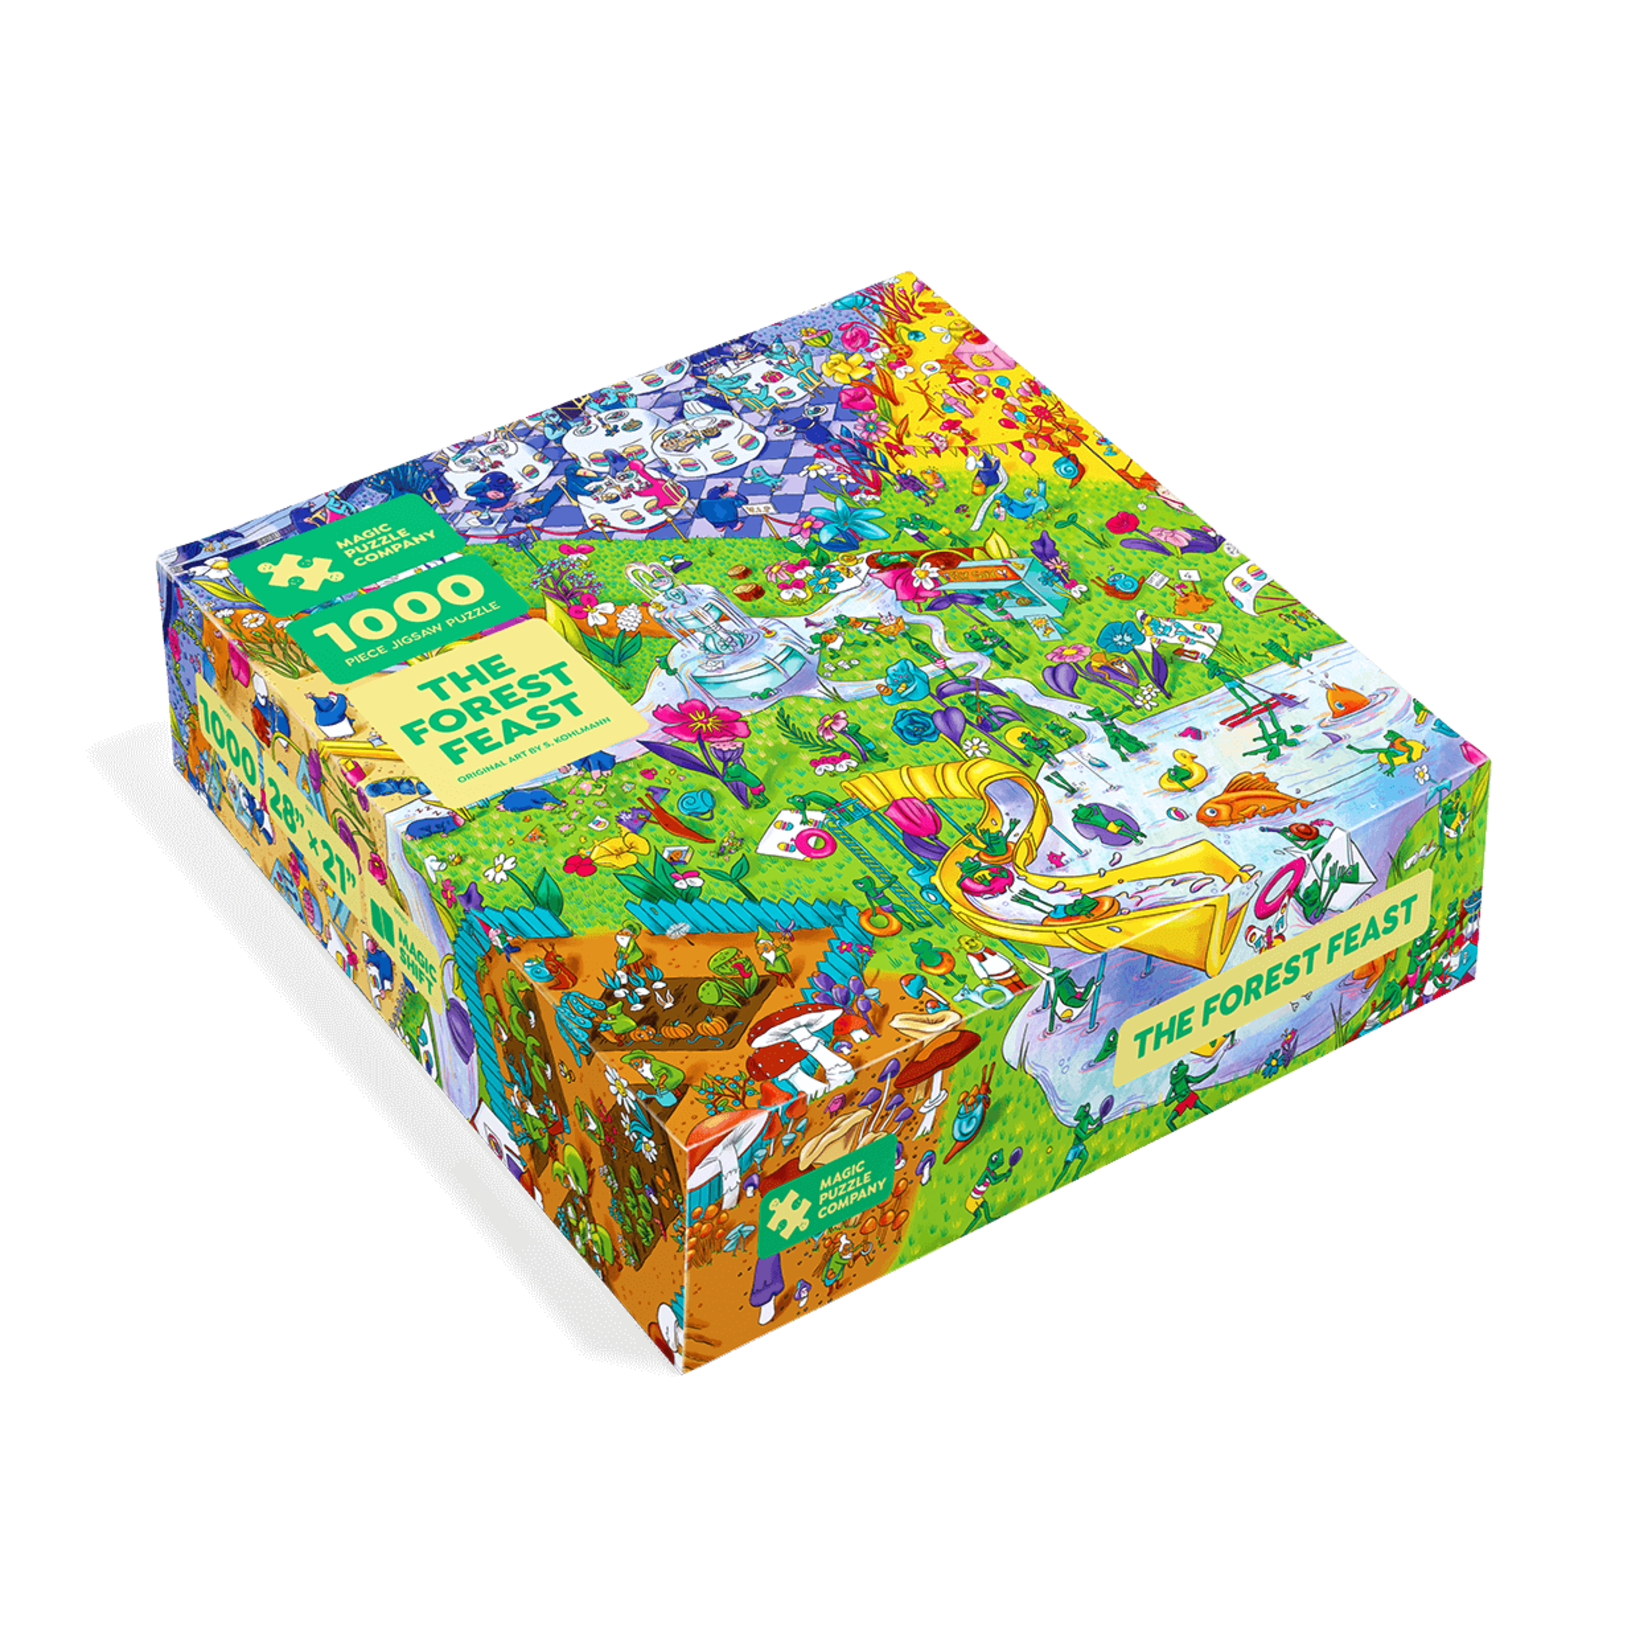 Magic Puzzle Company The Forest Feast, 1000-Piece Jigsaw Puzzle with Bonus Logic & Illusions